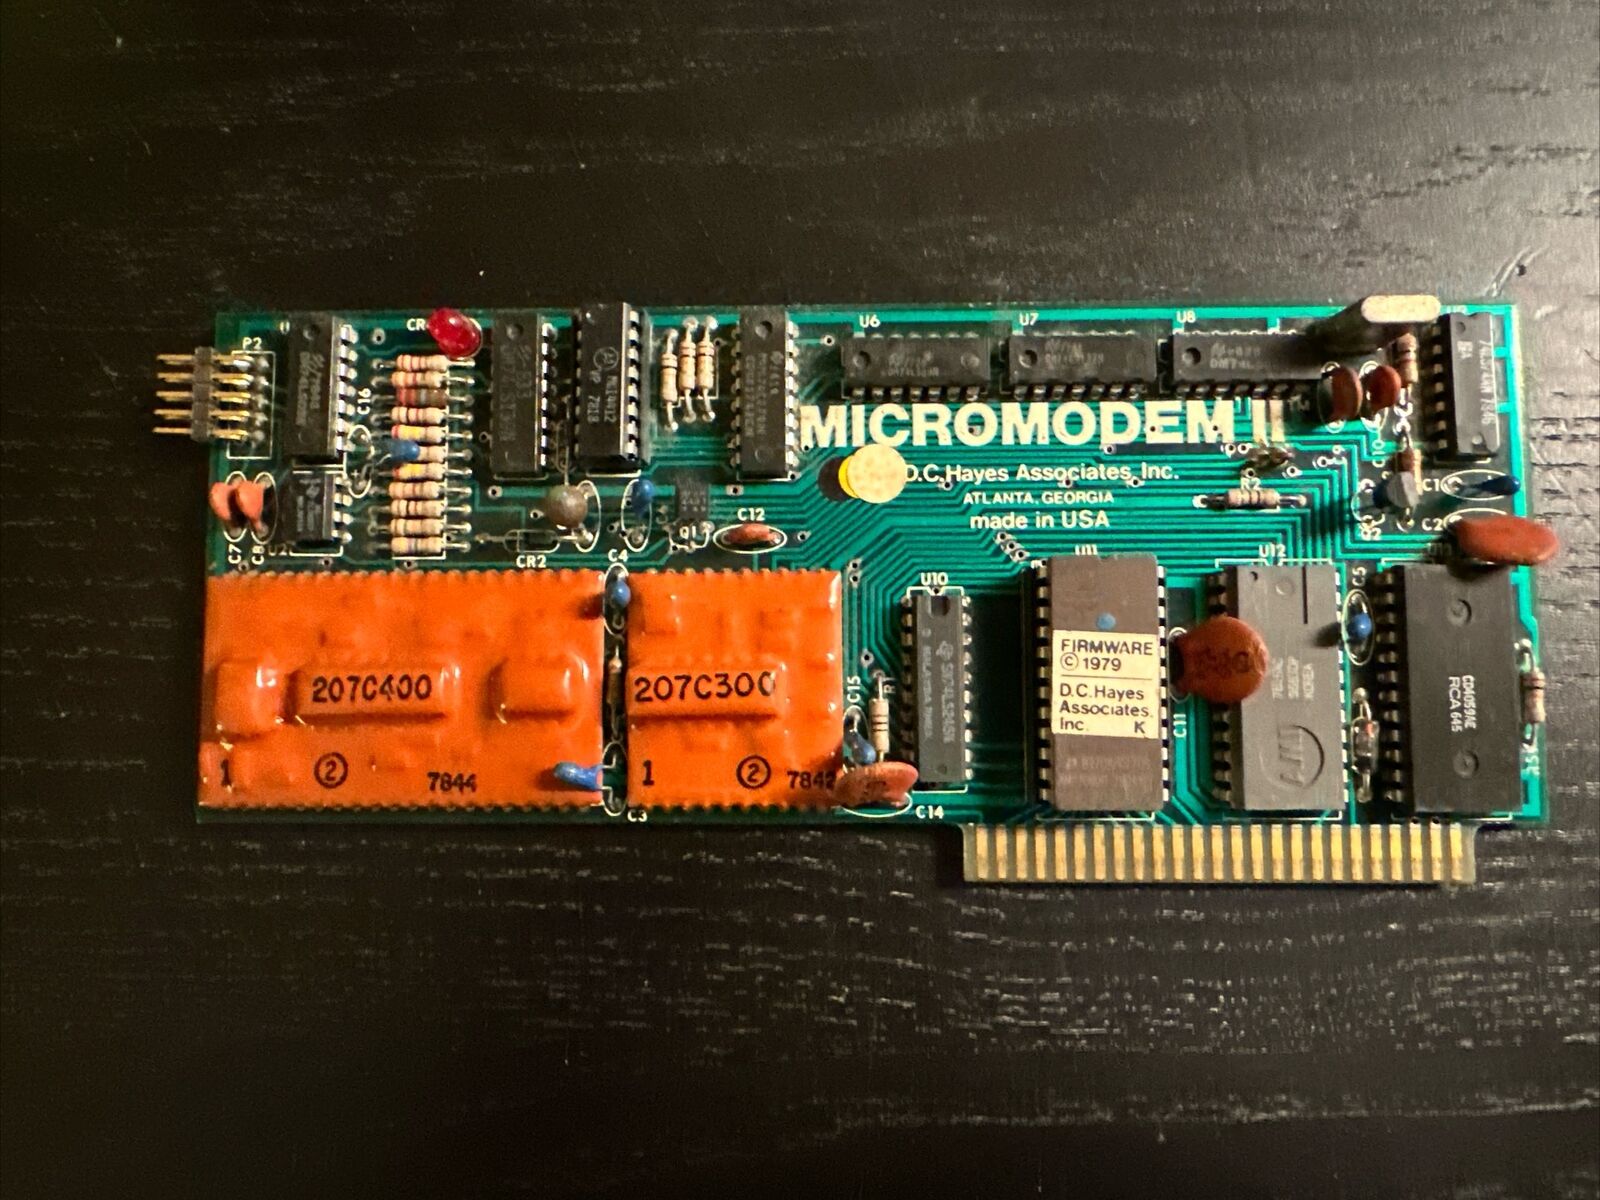 DC Hayes Micromodem II Modem For Apple II Computers 65-103 1978 + Microcoupler